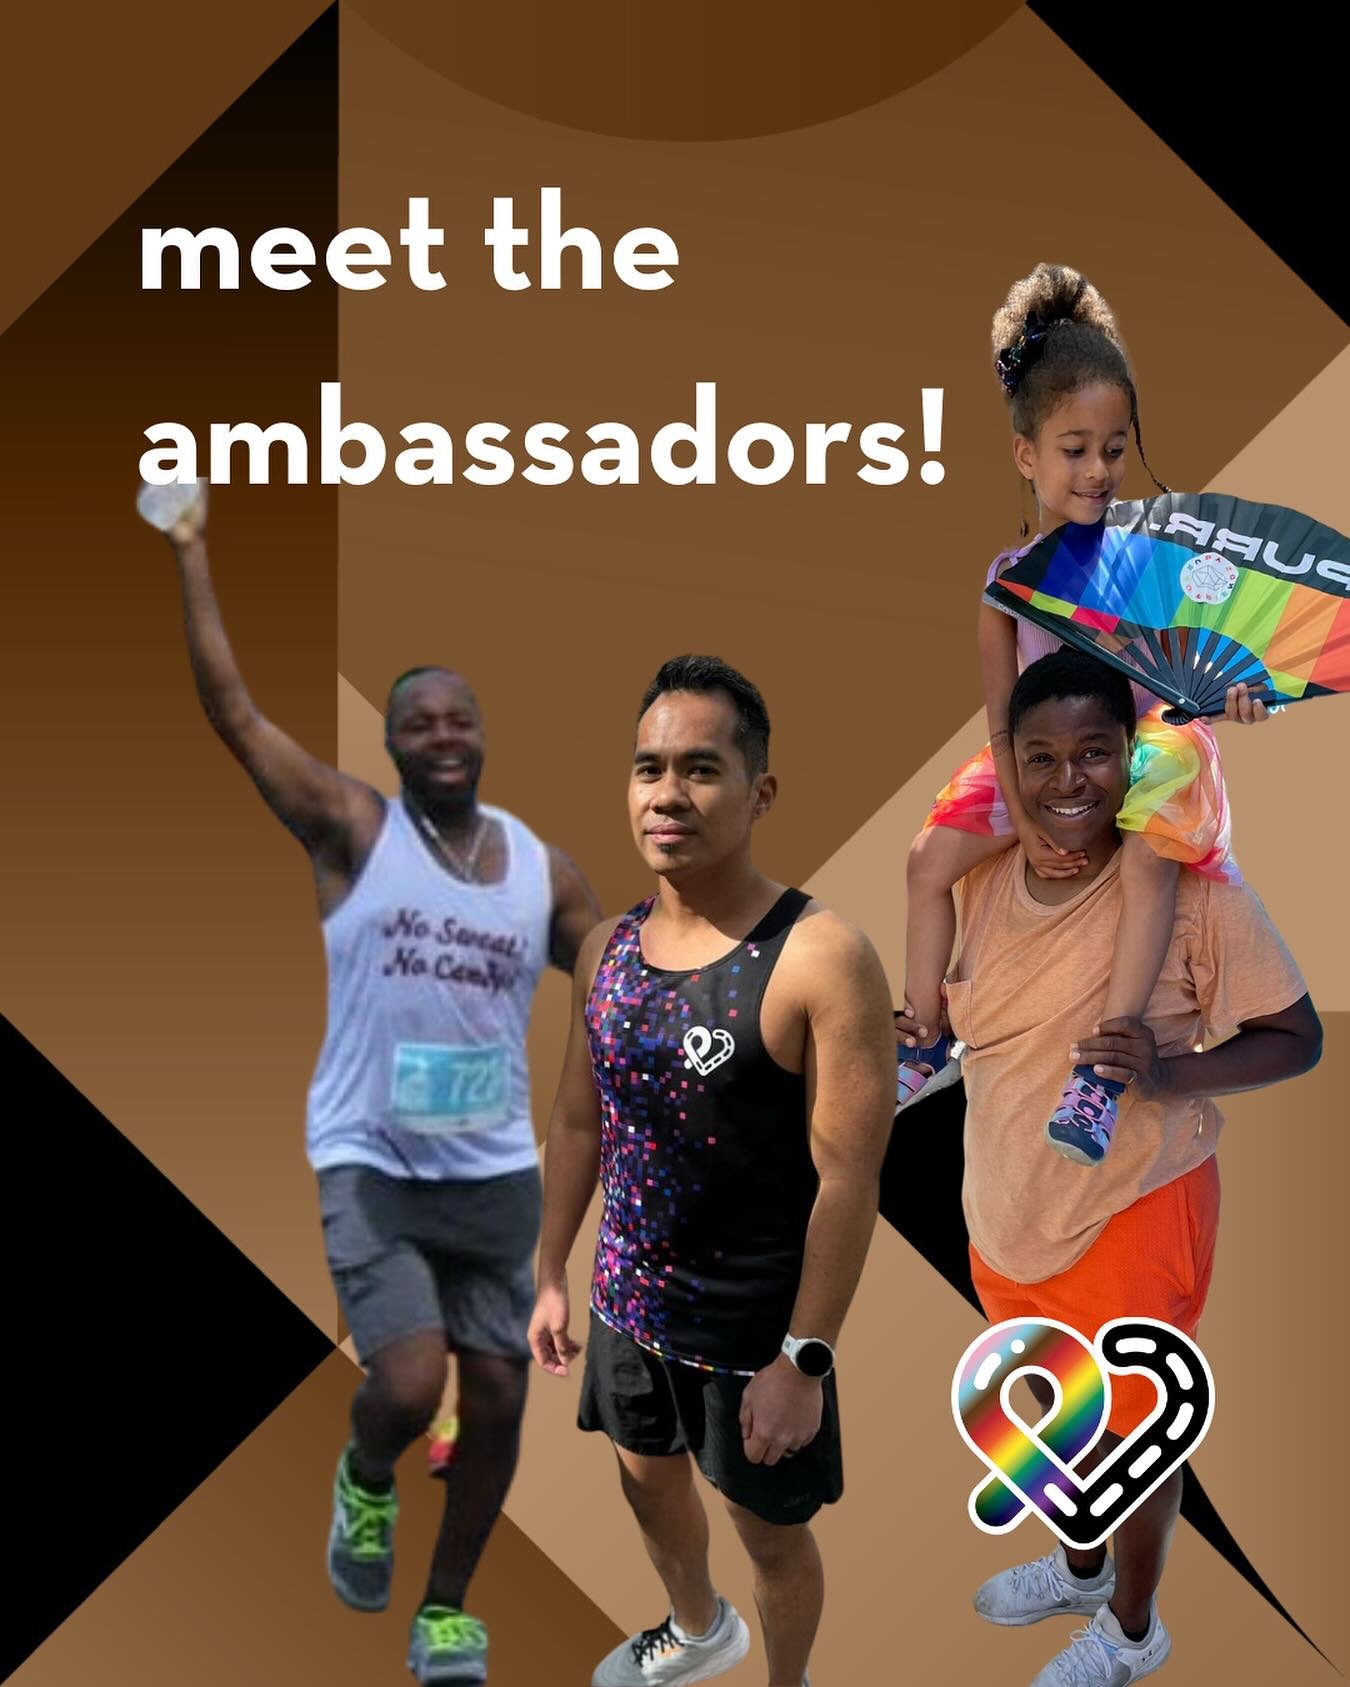 🏃&zwj;♂️ This year&rsquo;s ambassador team will be giving you all the inspo you need to reach your fundraising goals 🙌

&ldquo;Running has allowed me to connect with many people and communities.  I&rsquo;m running and fundraising in this year&rsquo